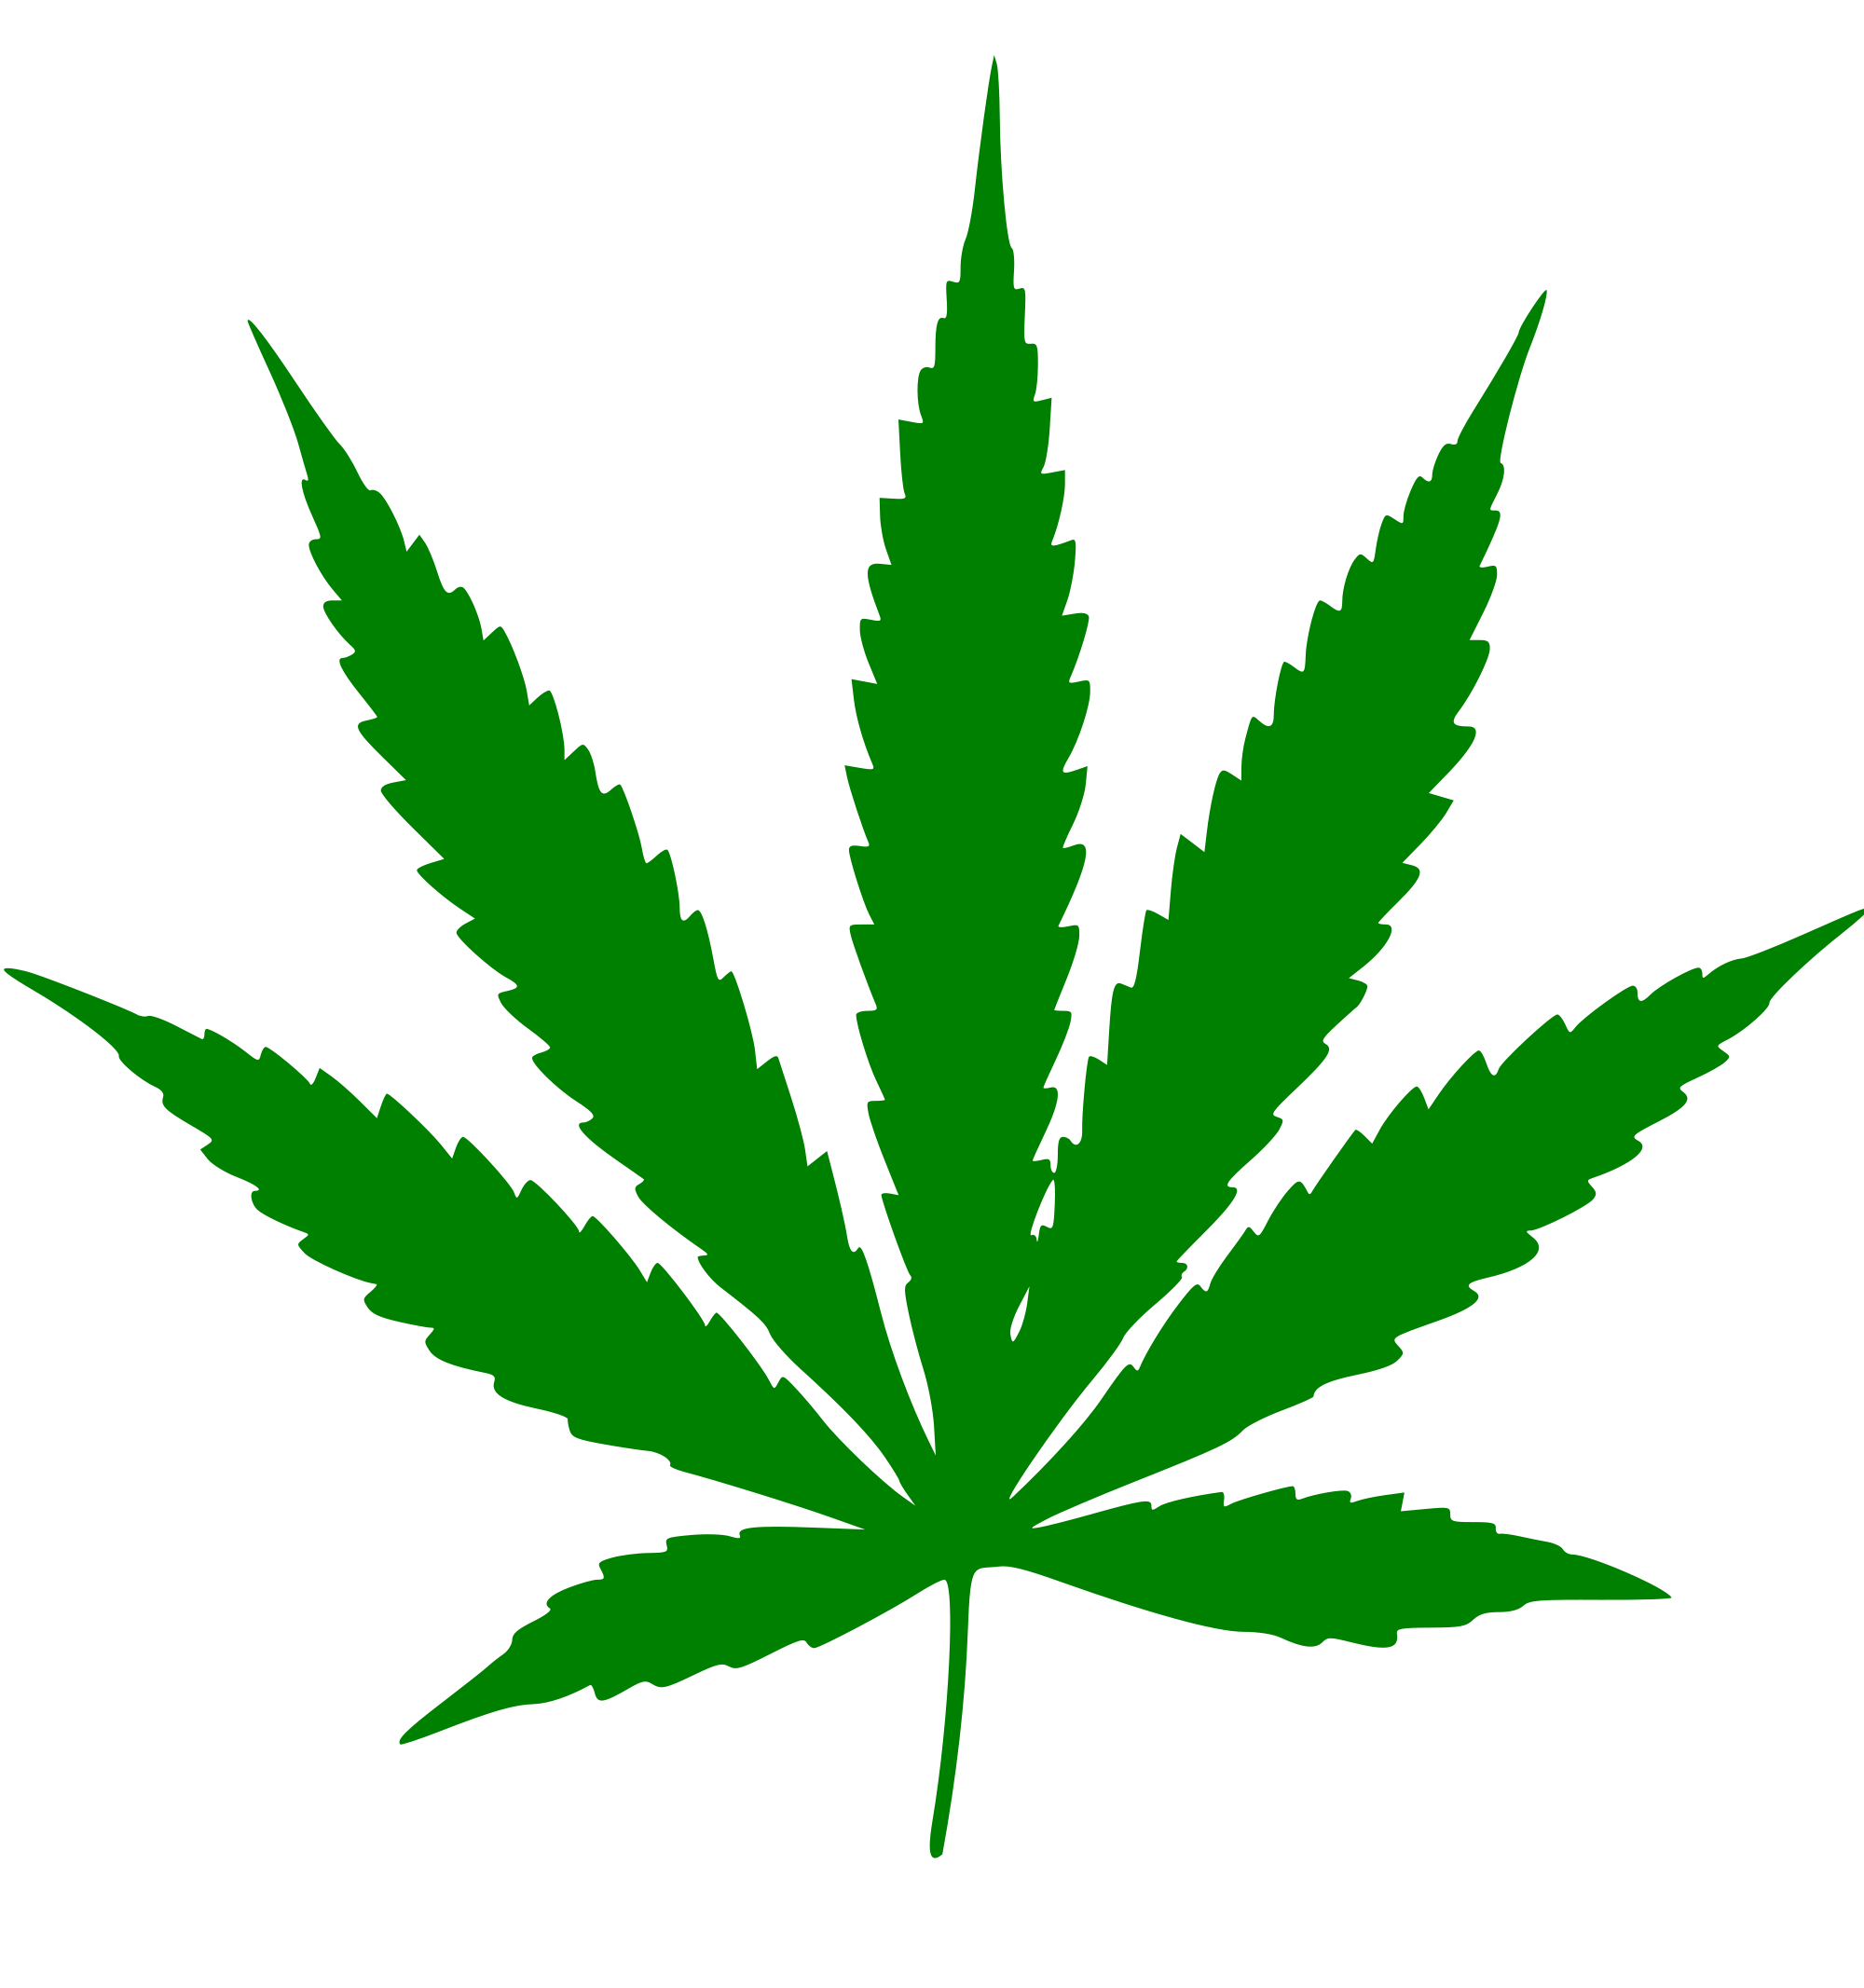 Weed Leaf | Clipart Panda - Free Clipart Images